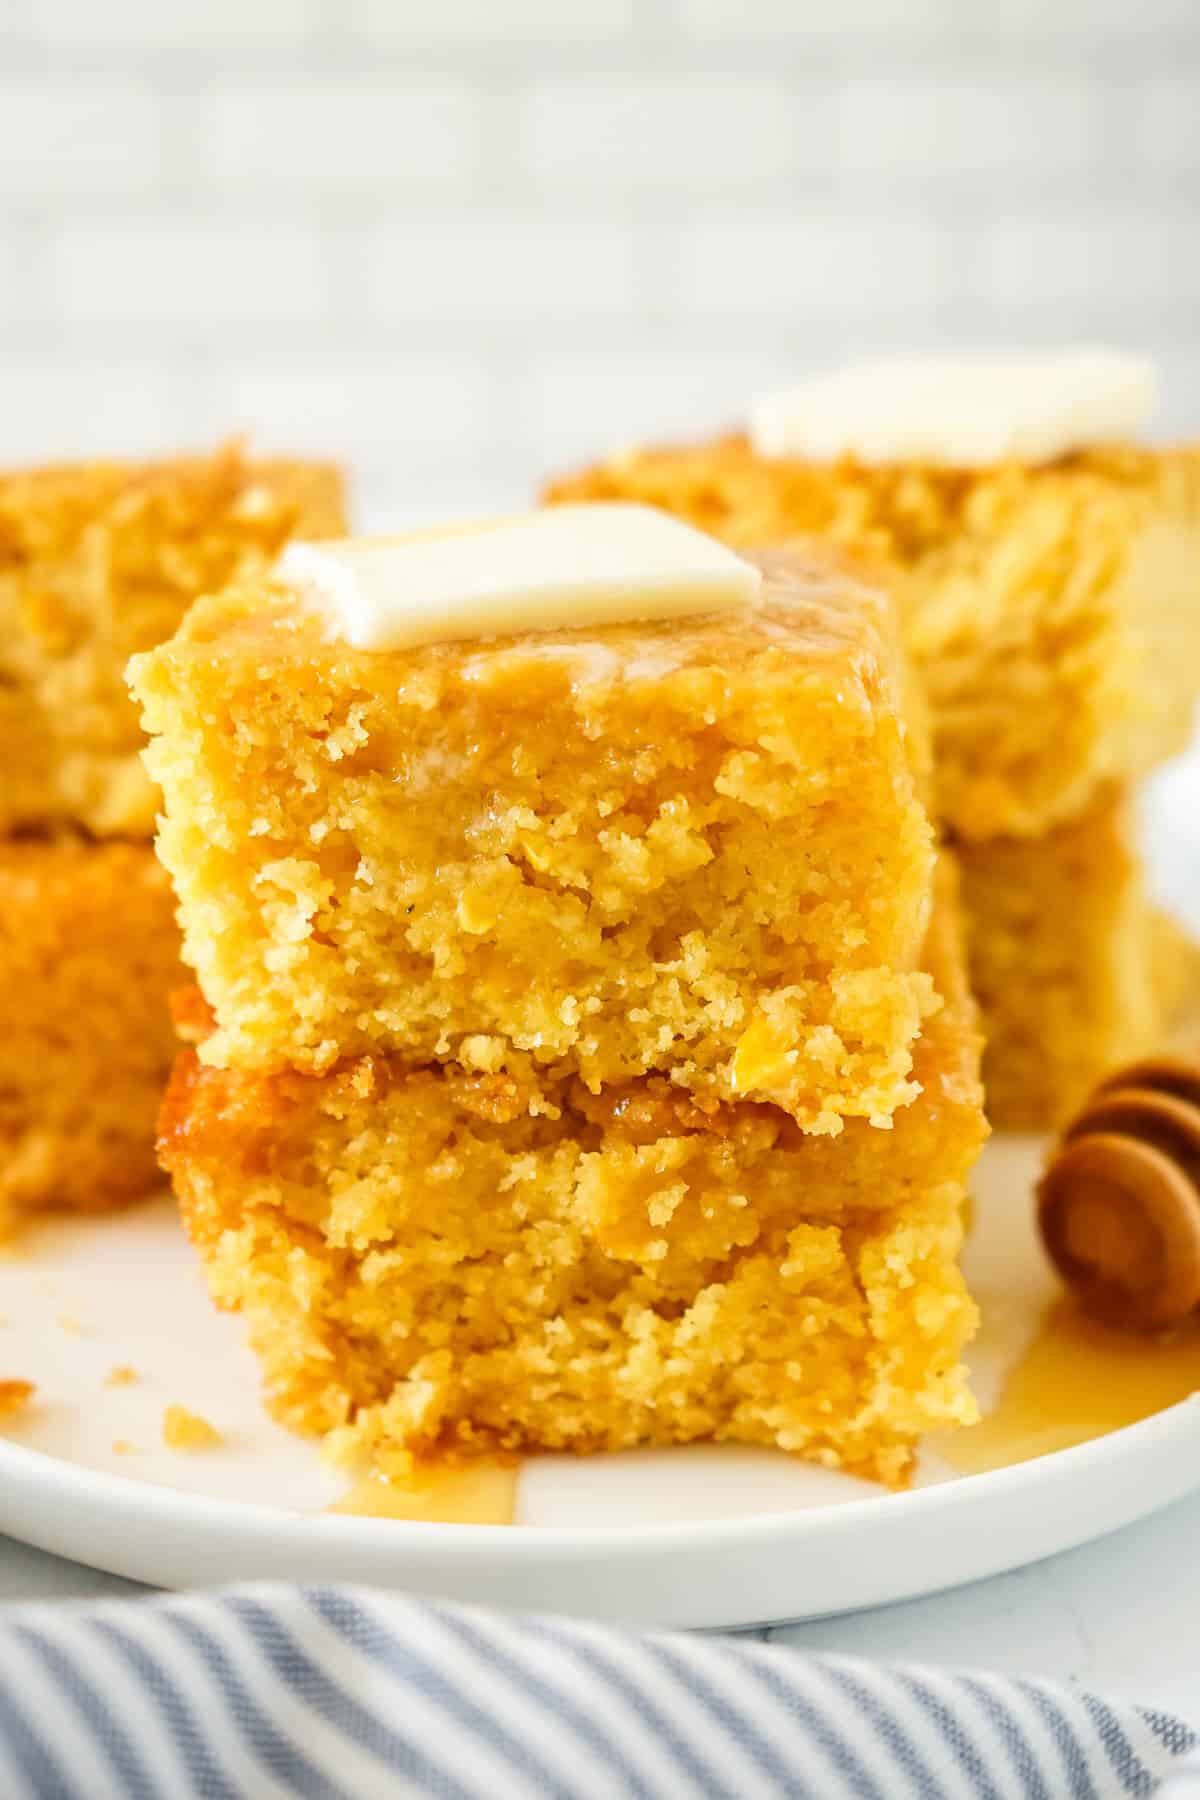 A stack of two pieces of sweet Jiffy cornbread on a plate with butter.